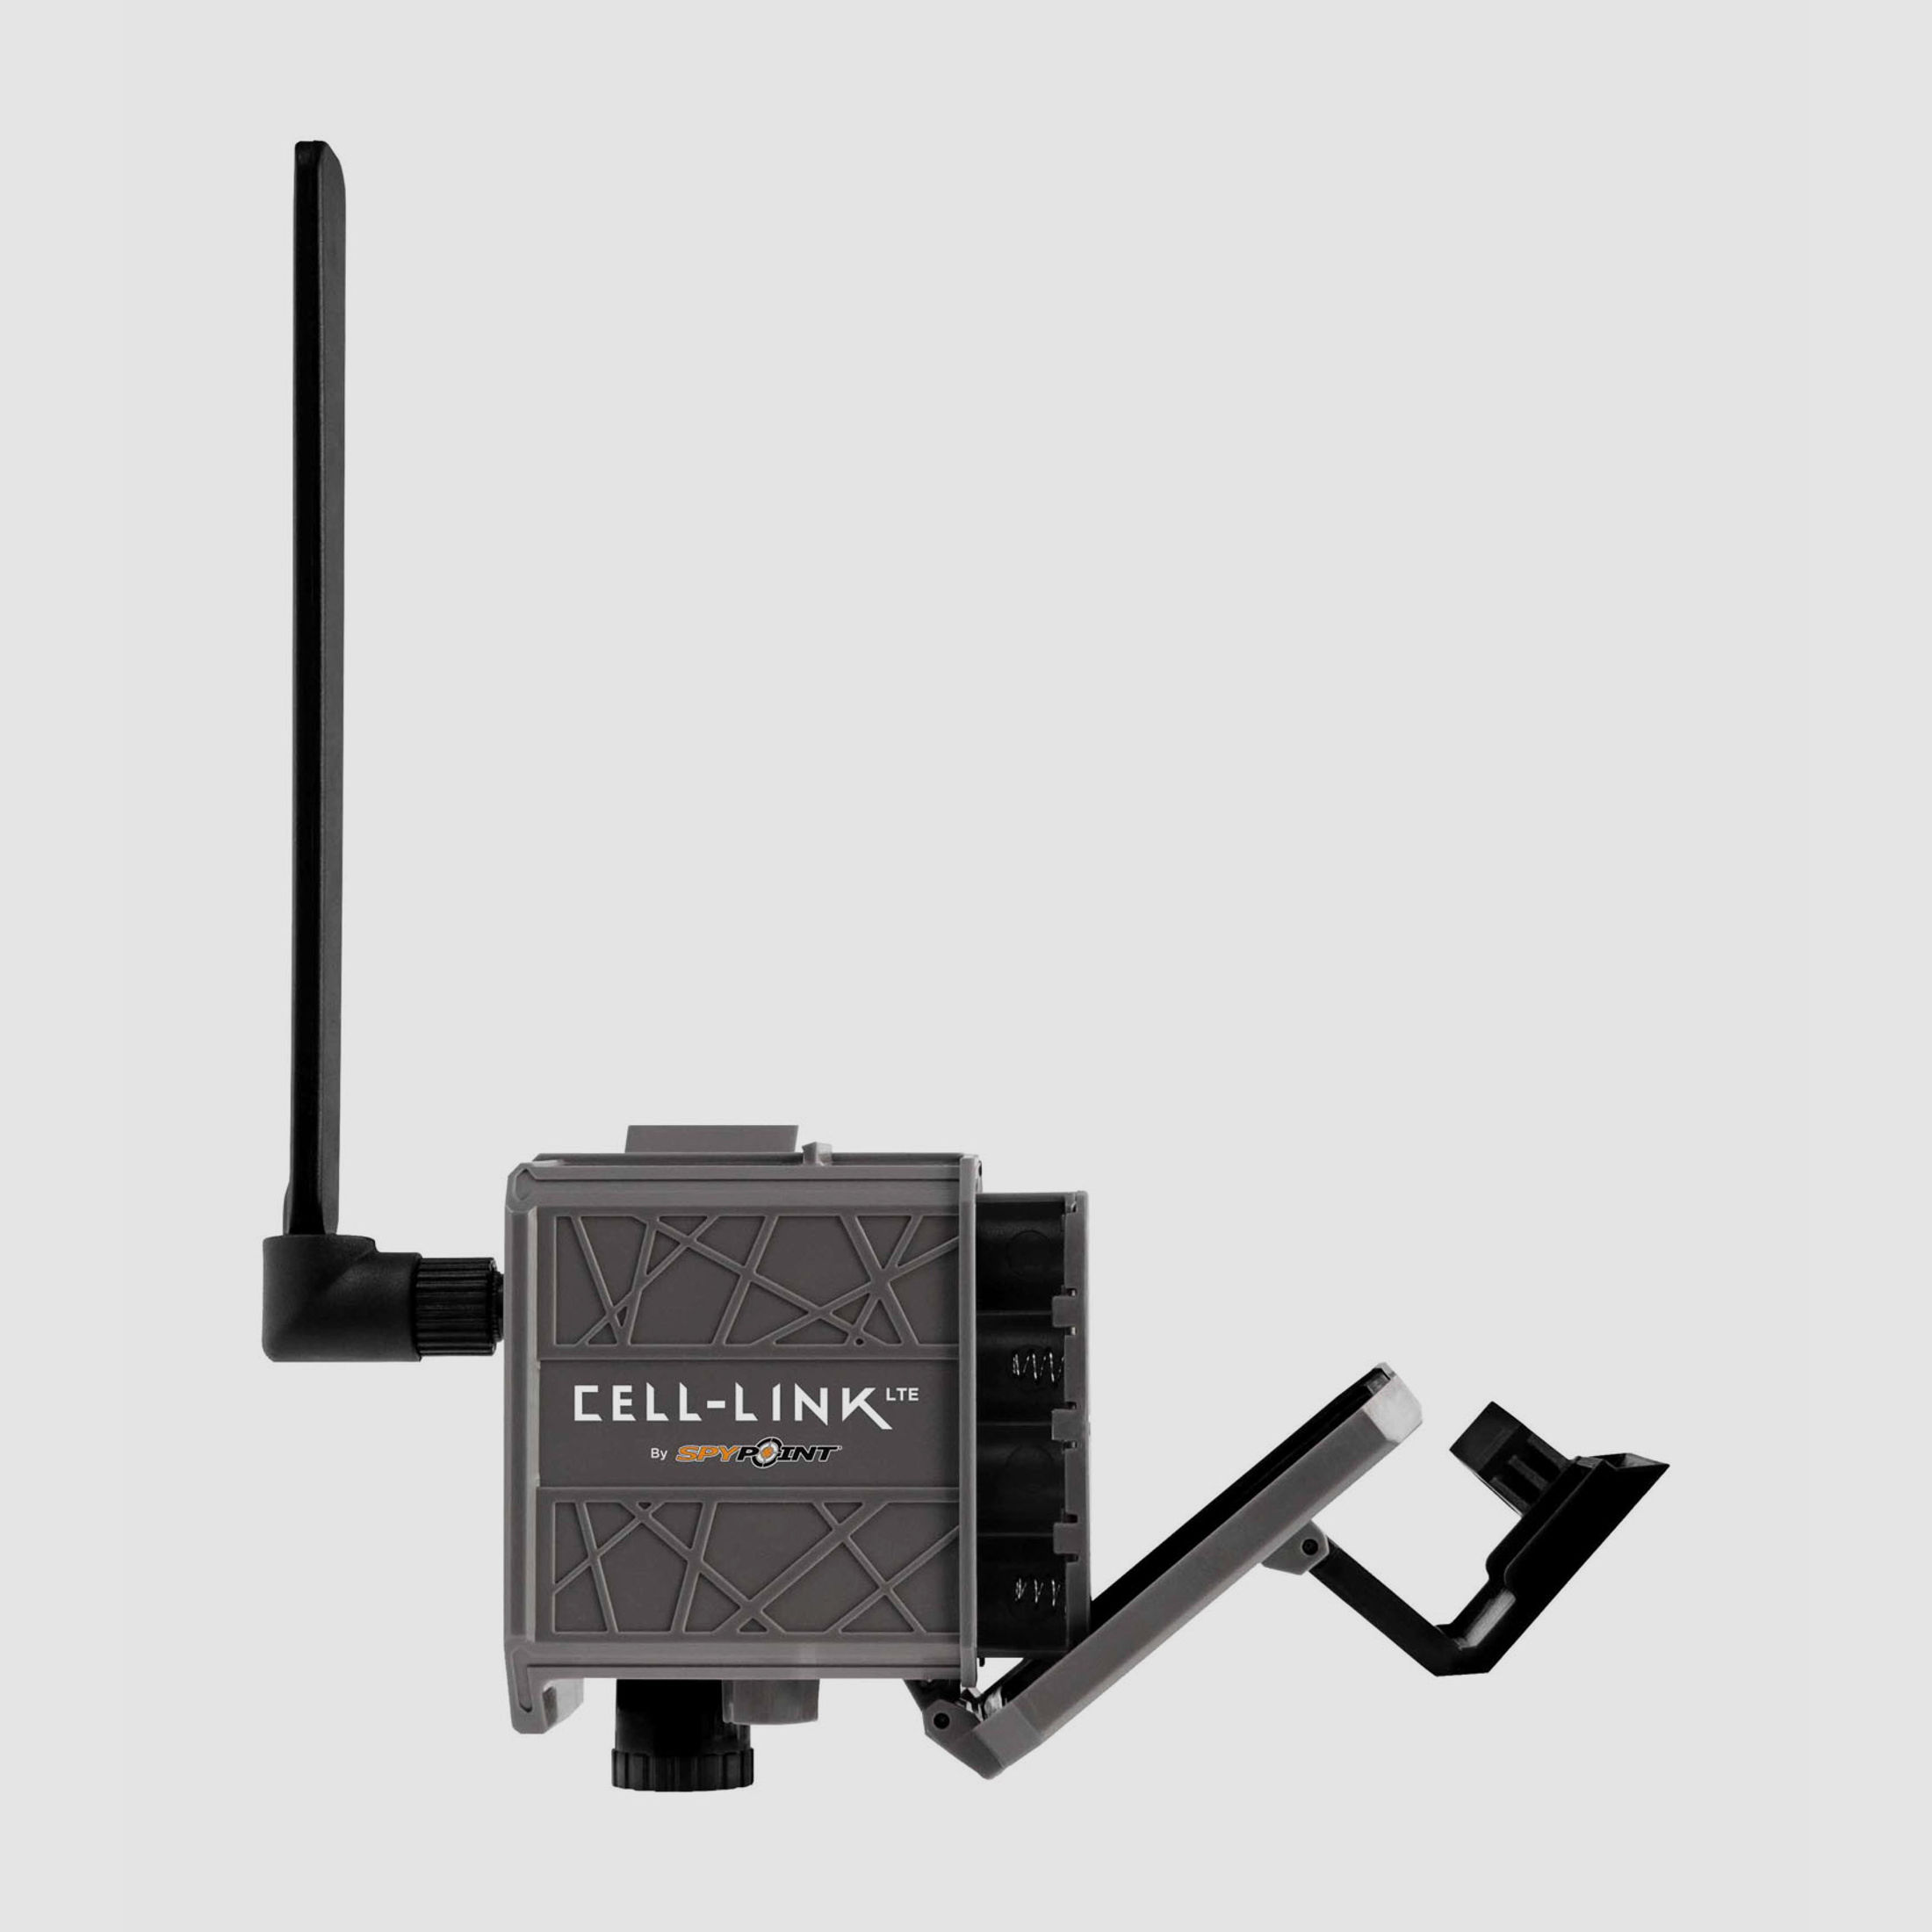 Spypoint Cell Link LTE